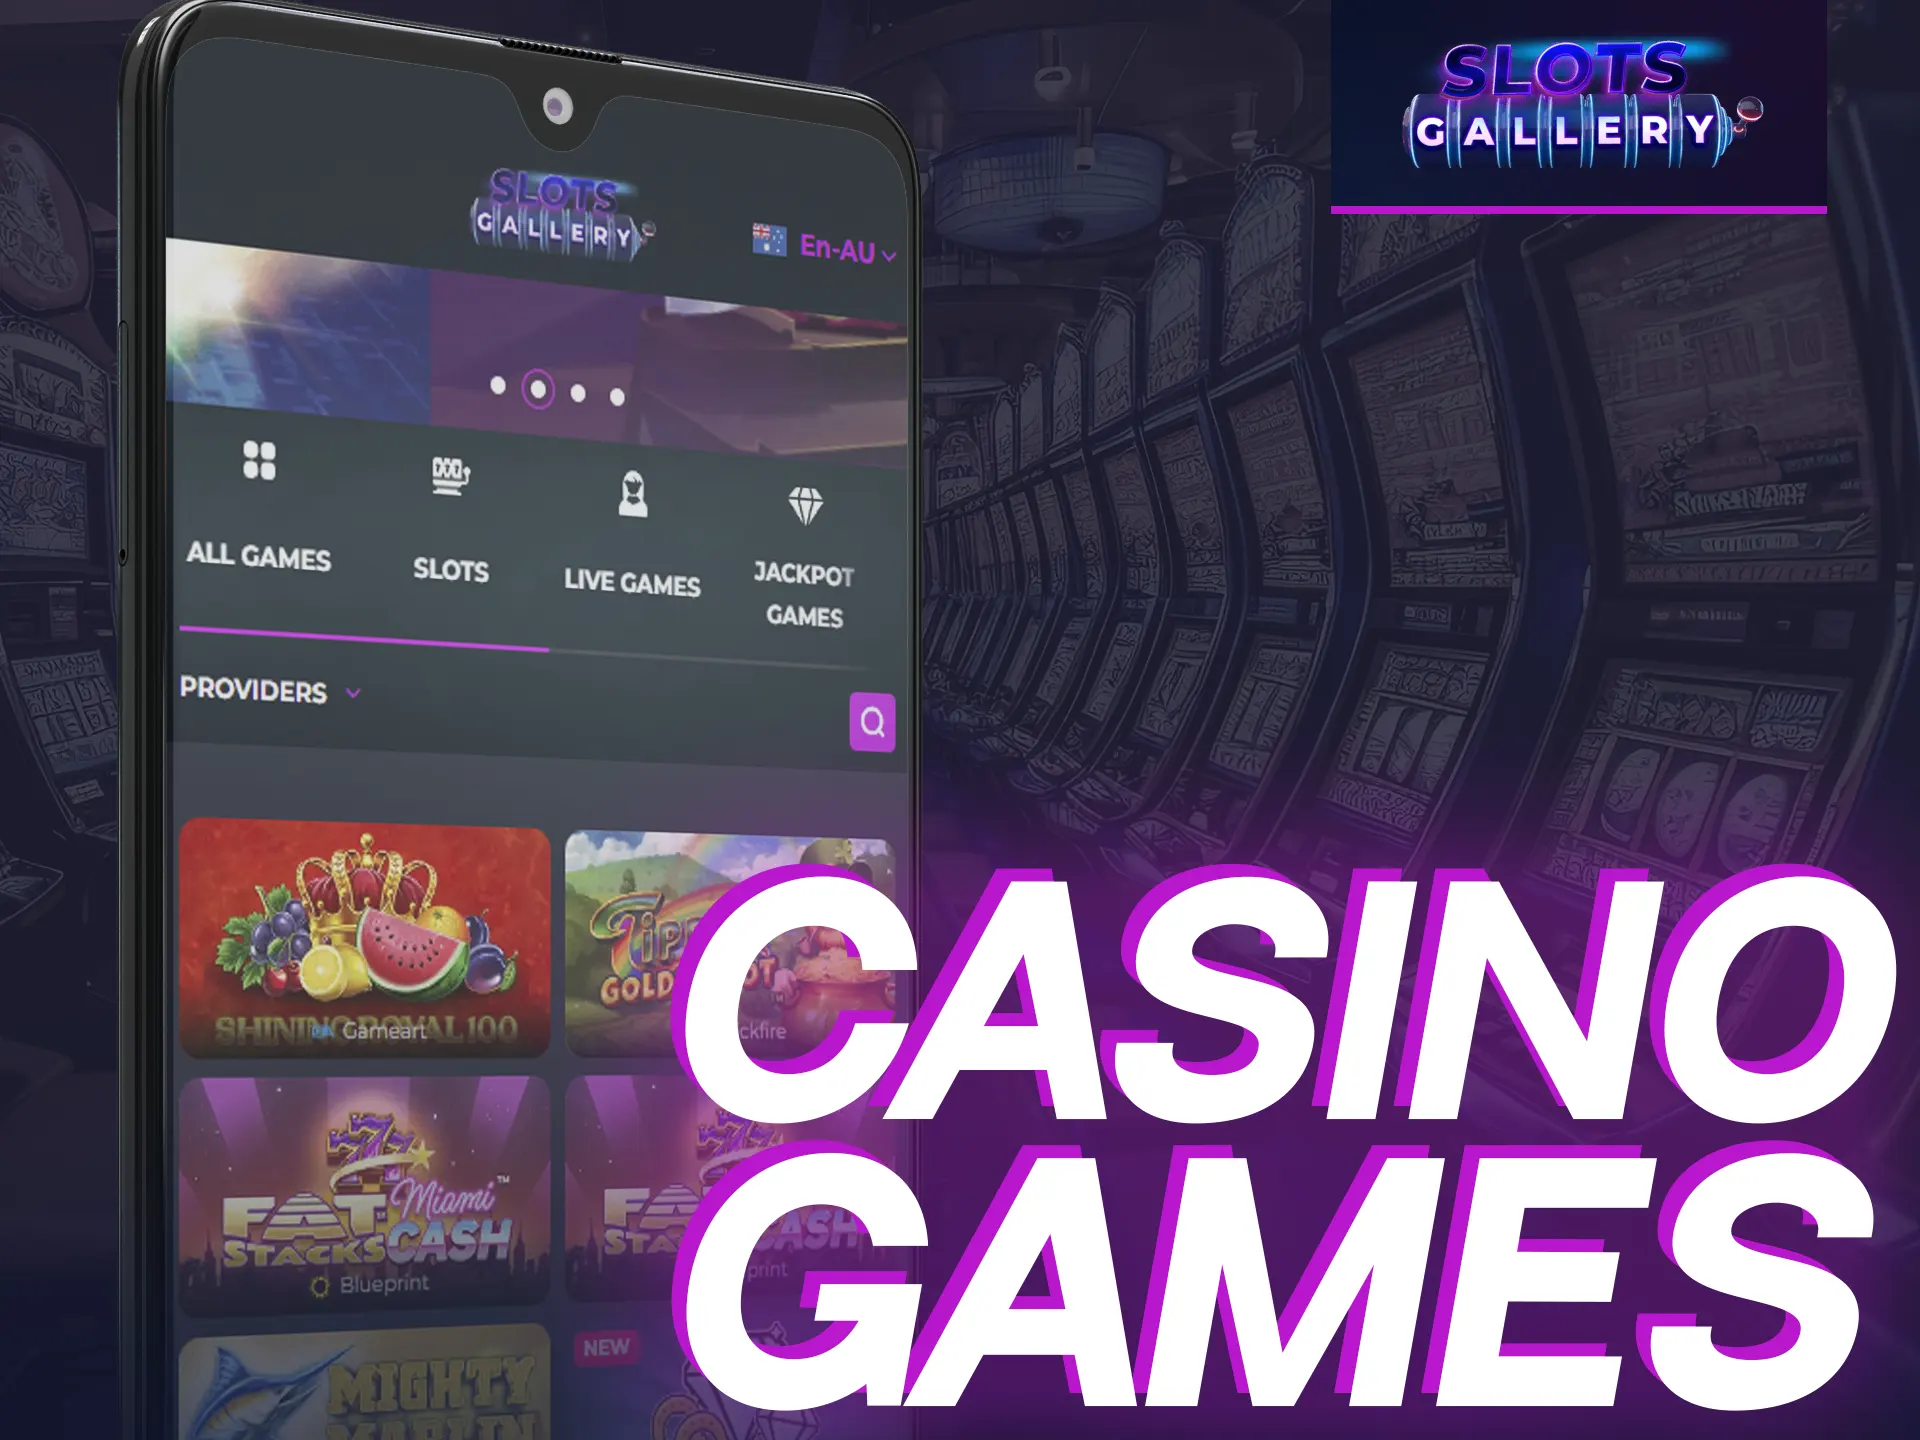 Get all casino games on Slots Gallery app.